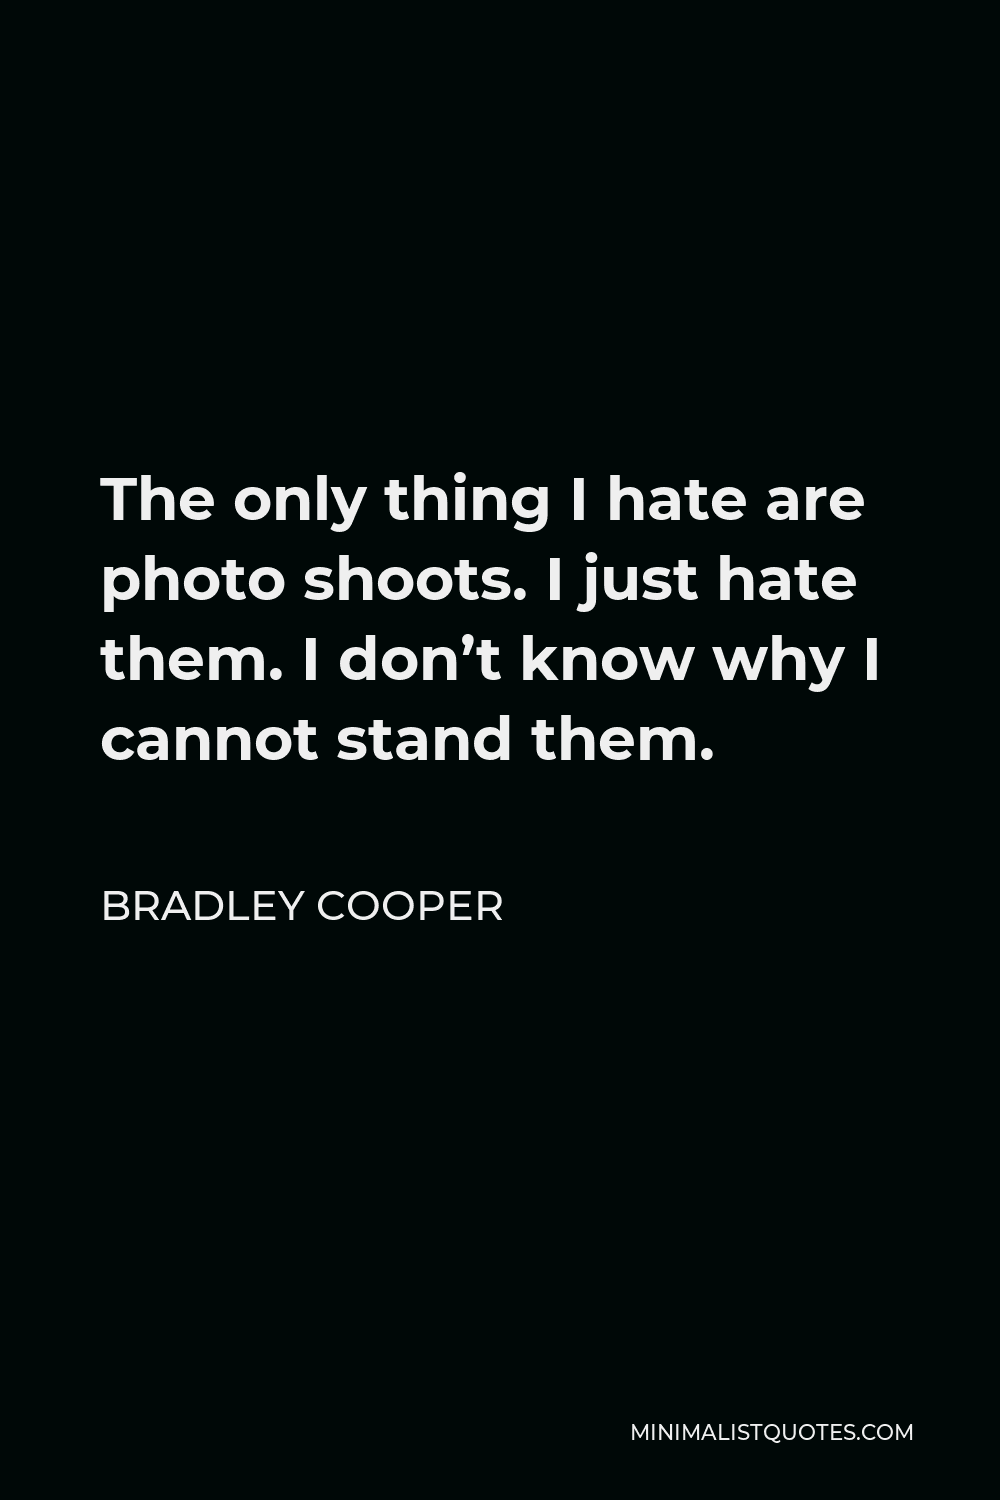 Bradley Cooper Quote - The only thing I hate are photo shoots. I just hate them. I don’t know why I cannot stand them.